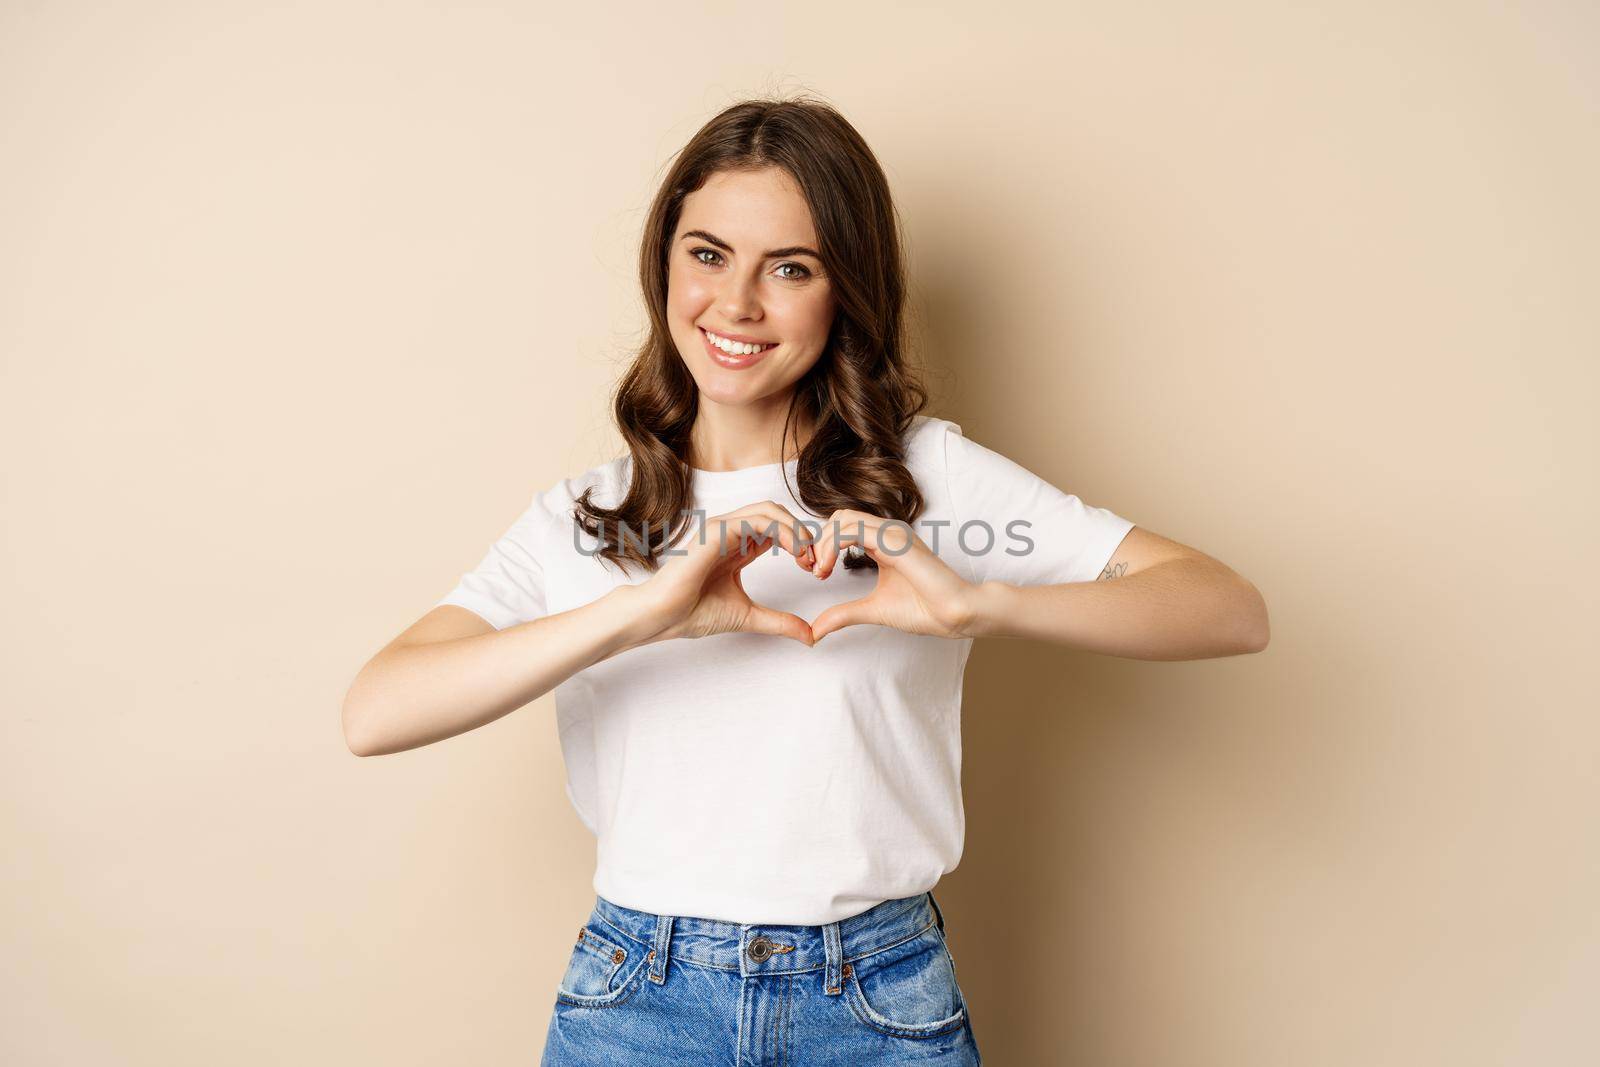 Lovely woman showing heart, love sign and smiling, standing over beige background in white t-shirt, beige background.